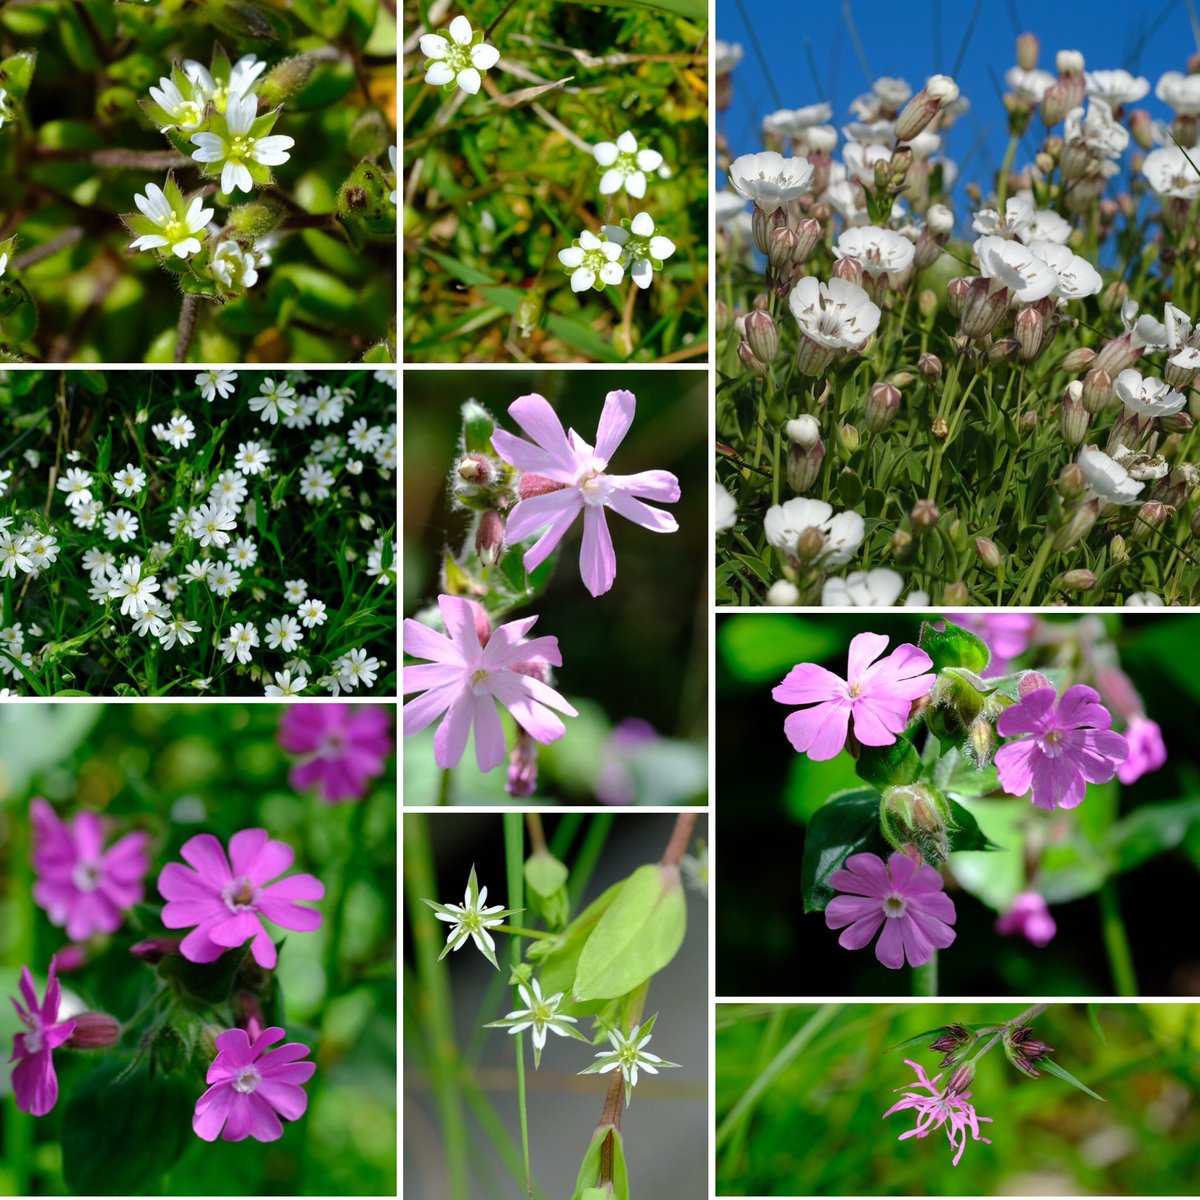 @wildflower_hour #PinkFamily GreaterStitchwort, Red Campion,Sea Campion, Bog Stitchwort, Ragged Robin plus I think Sea Mouse-ear and Heath Pearlwort on a very floriferous N.Pembrokeshire coastline and inland. Beautiful #wildflowerid @BSBIbotany